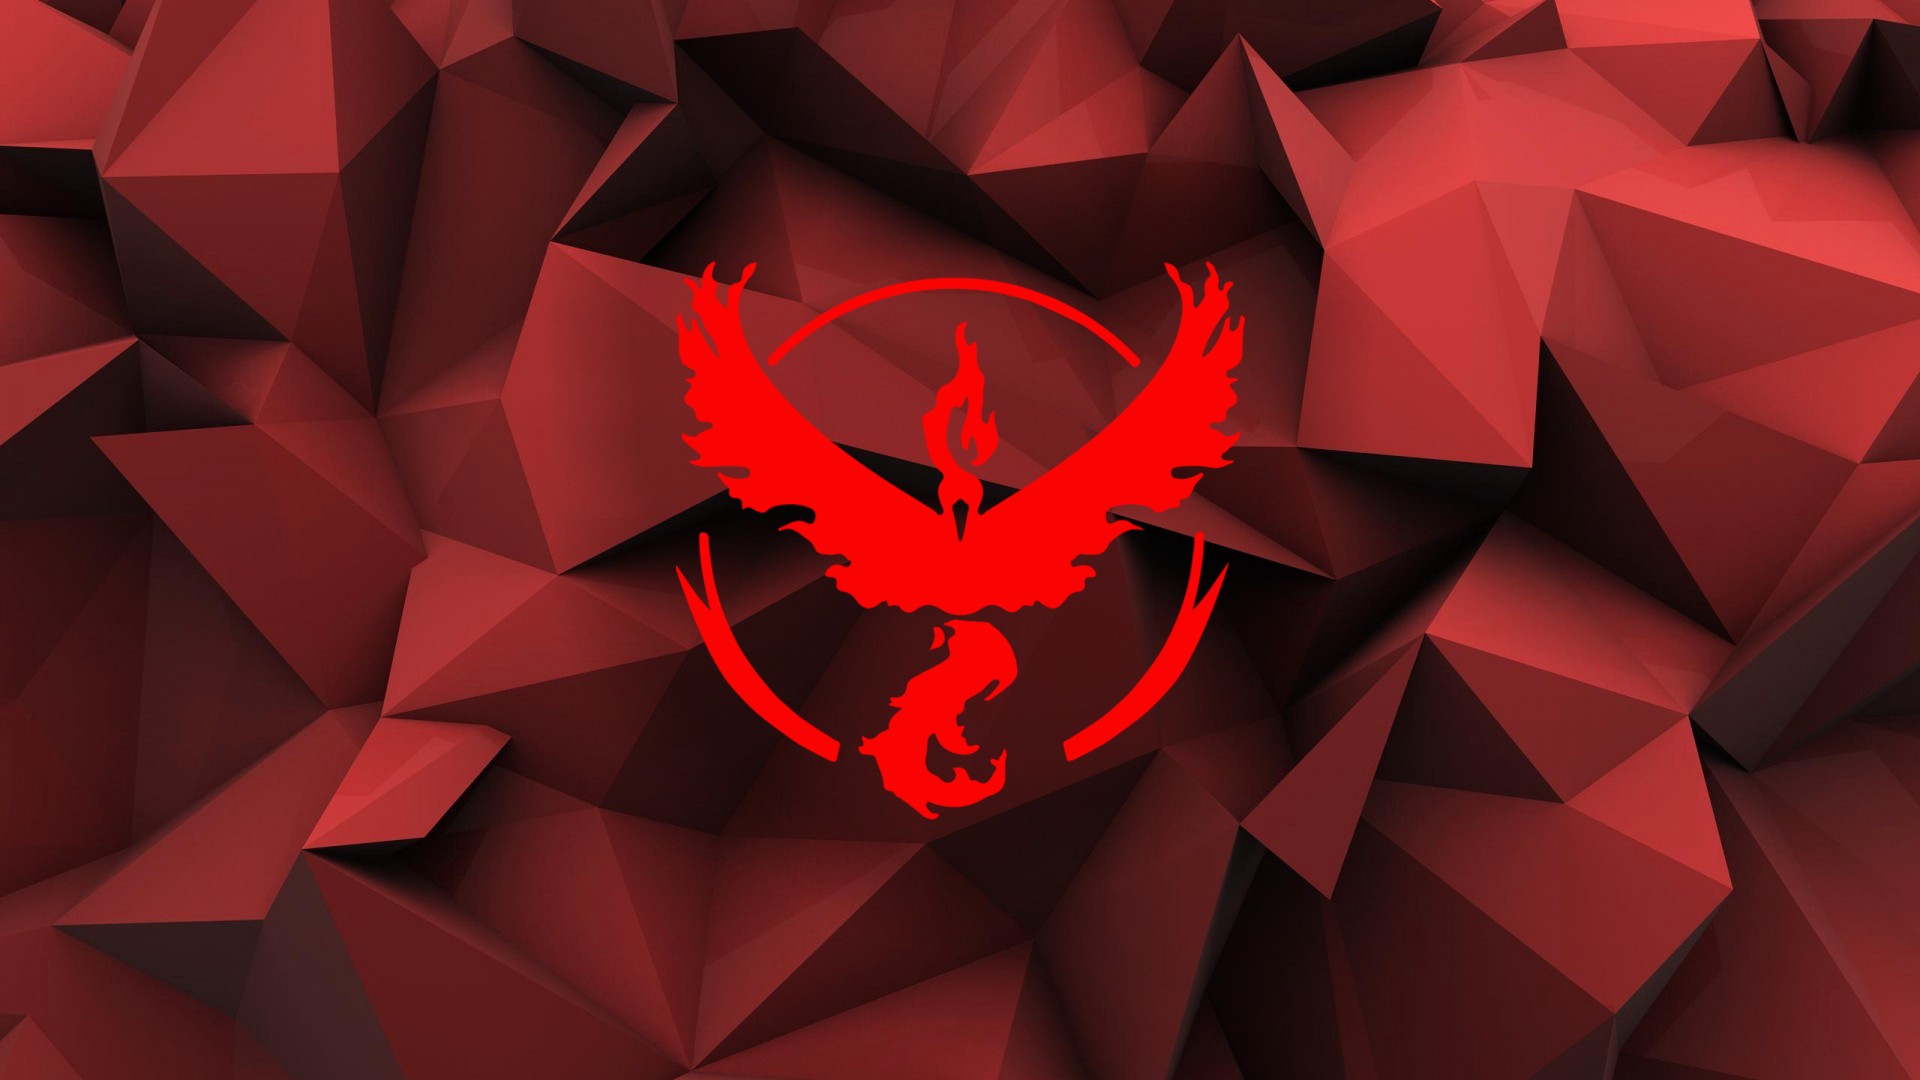 Team Valor, Poly, Red, Pokémon Wallpapers HD / Desktop and Mobile